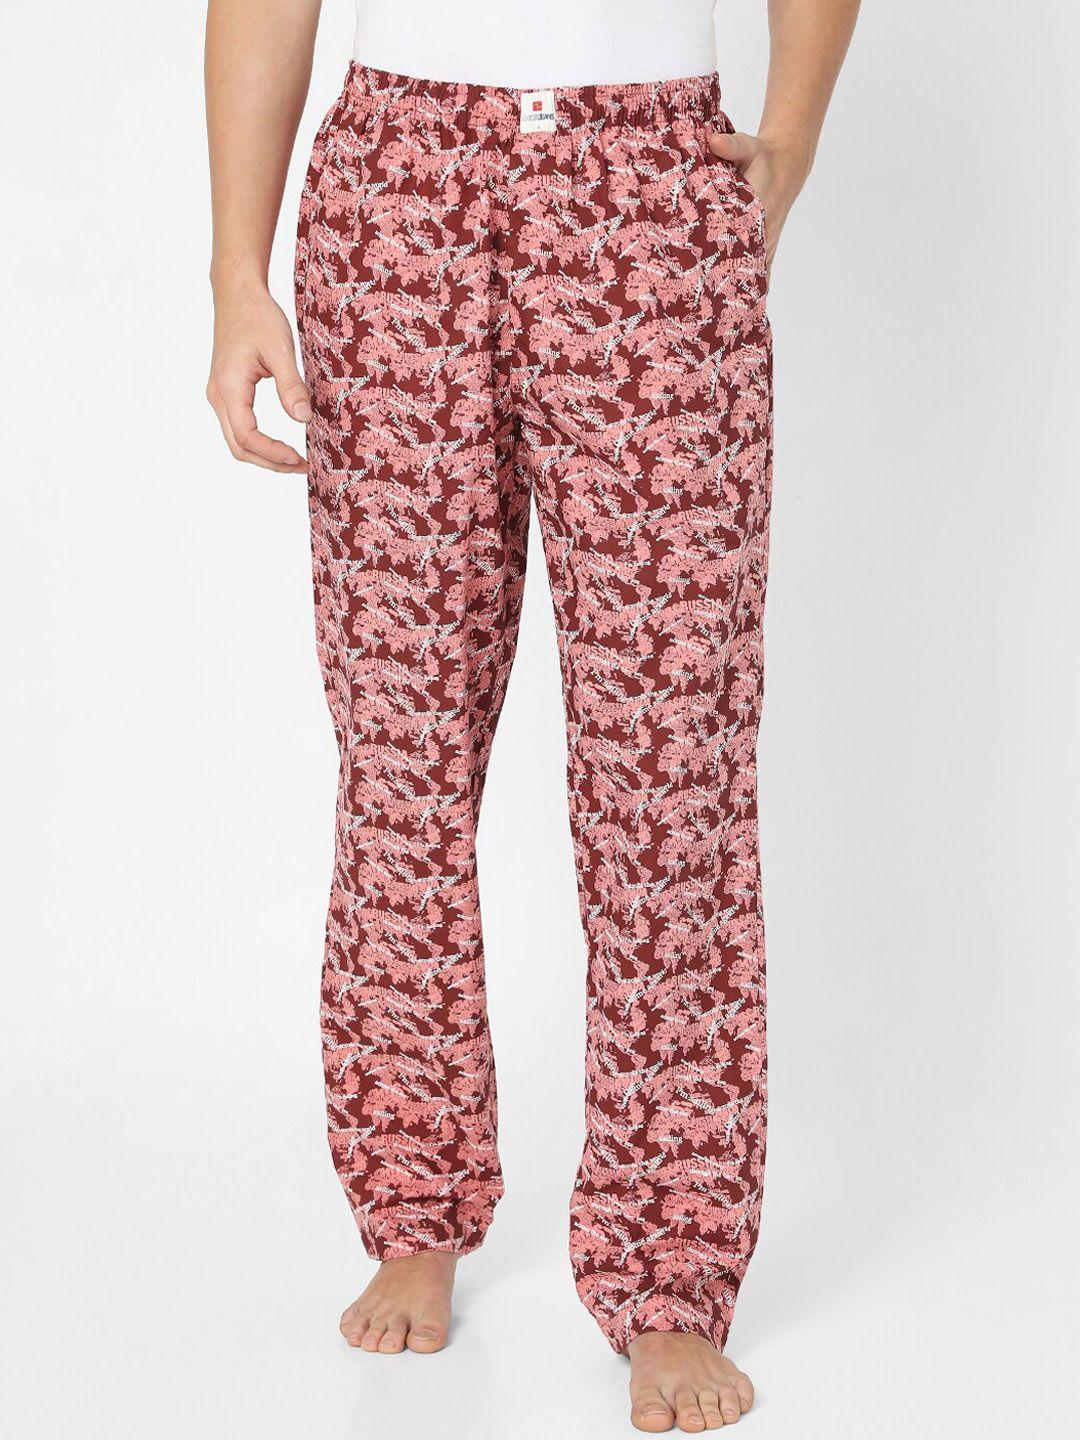 underjeans-by-spykar-men-red-printed-cotton-lounge-pants